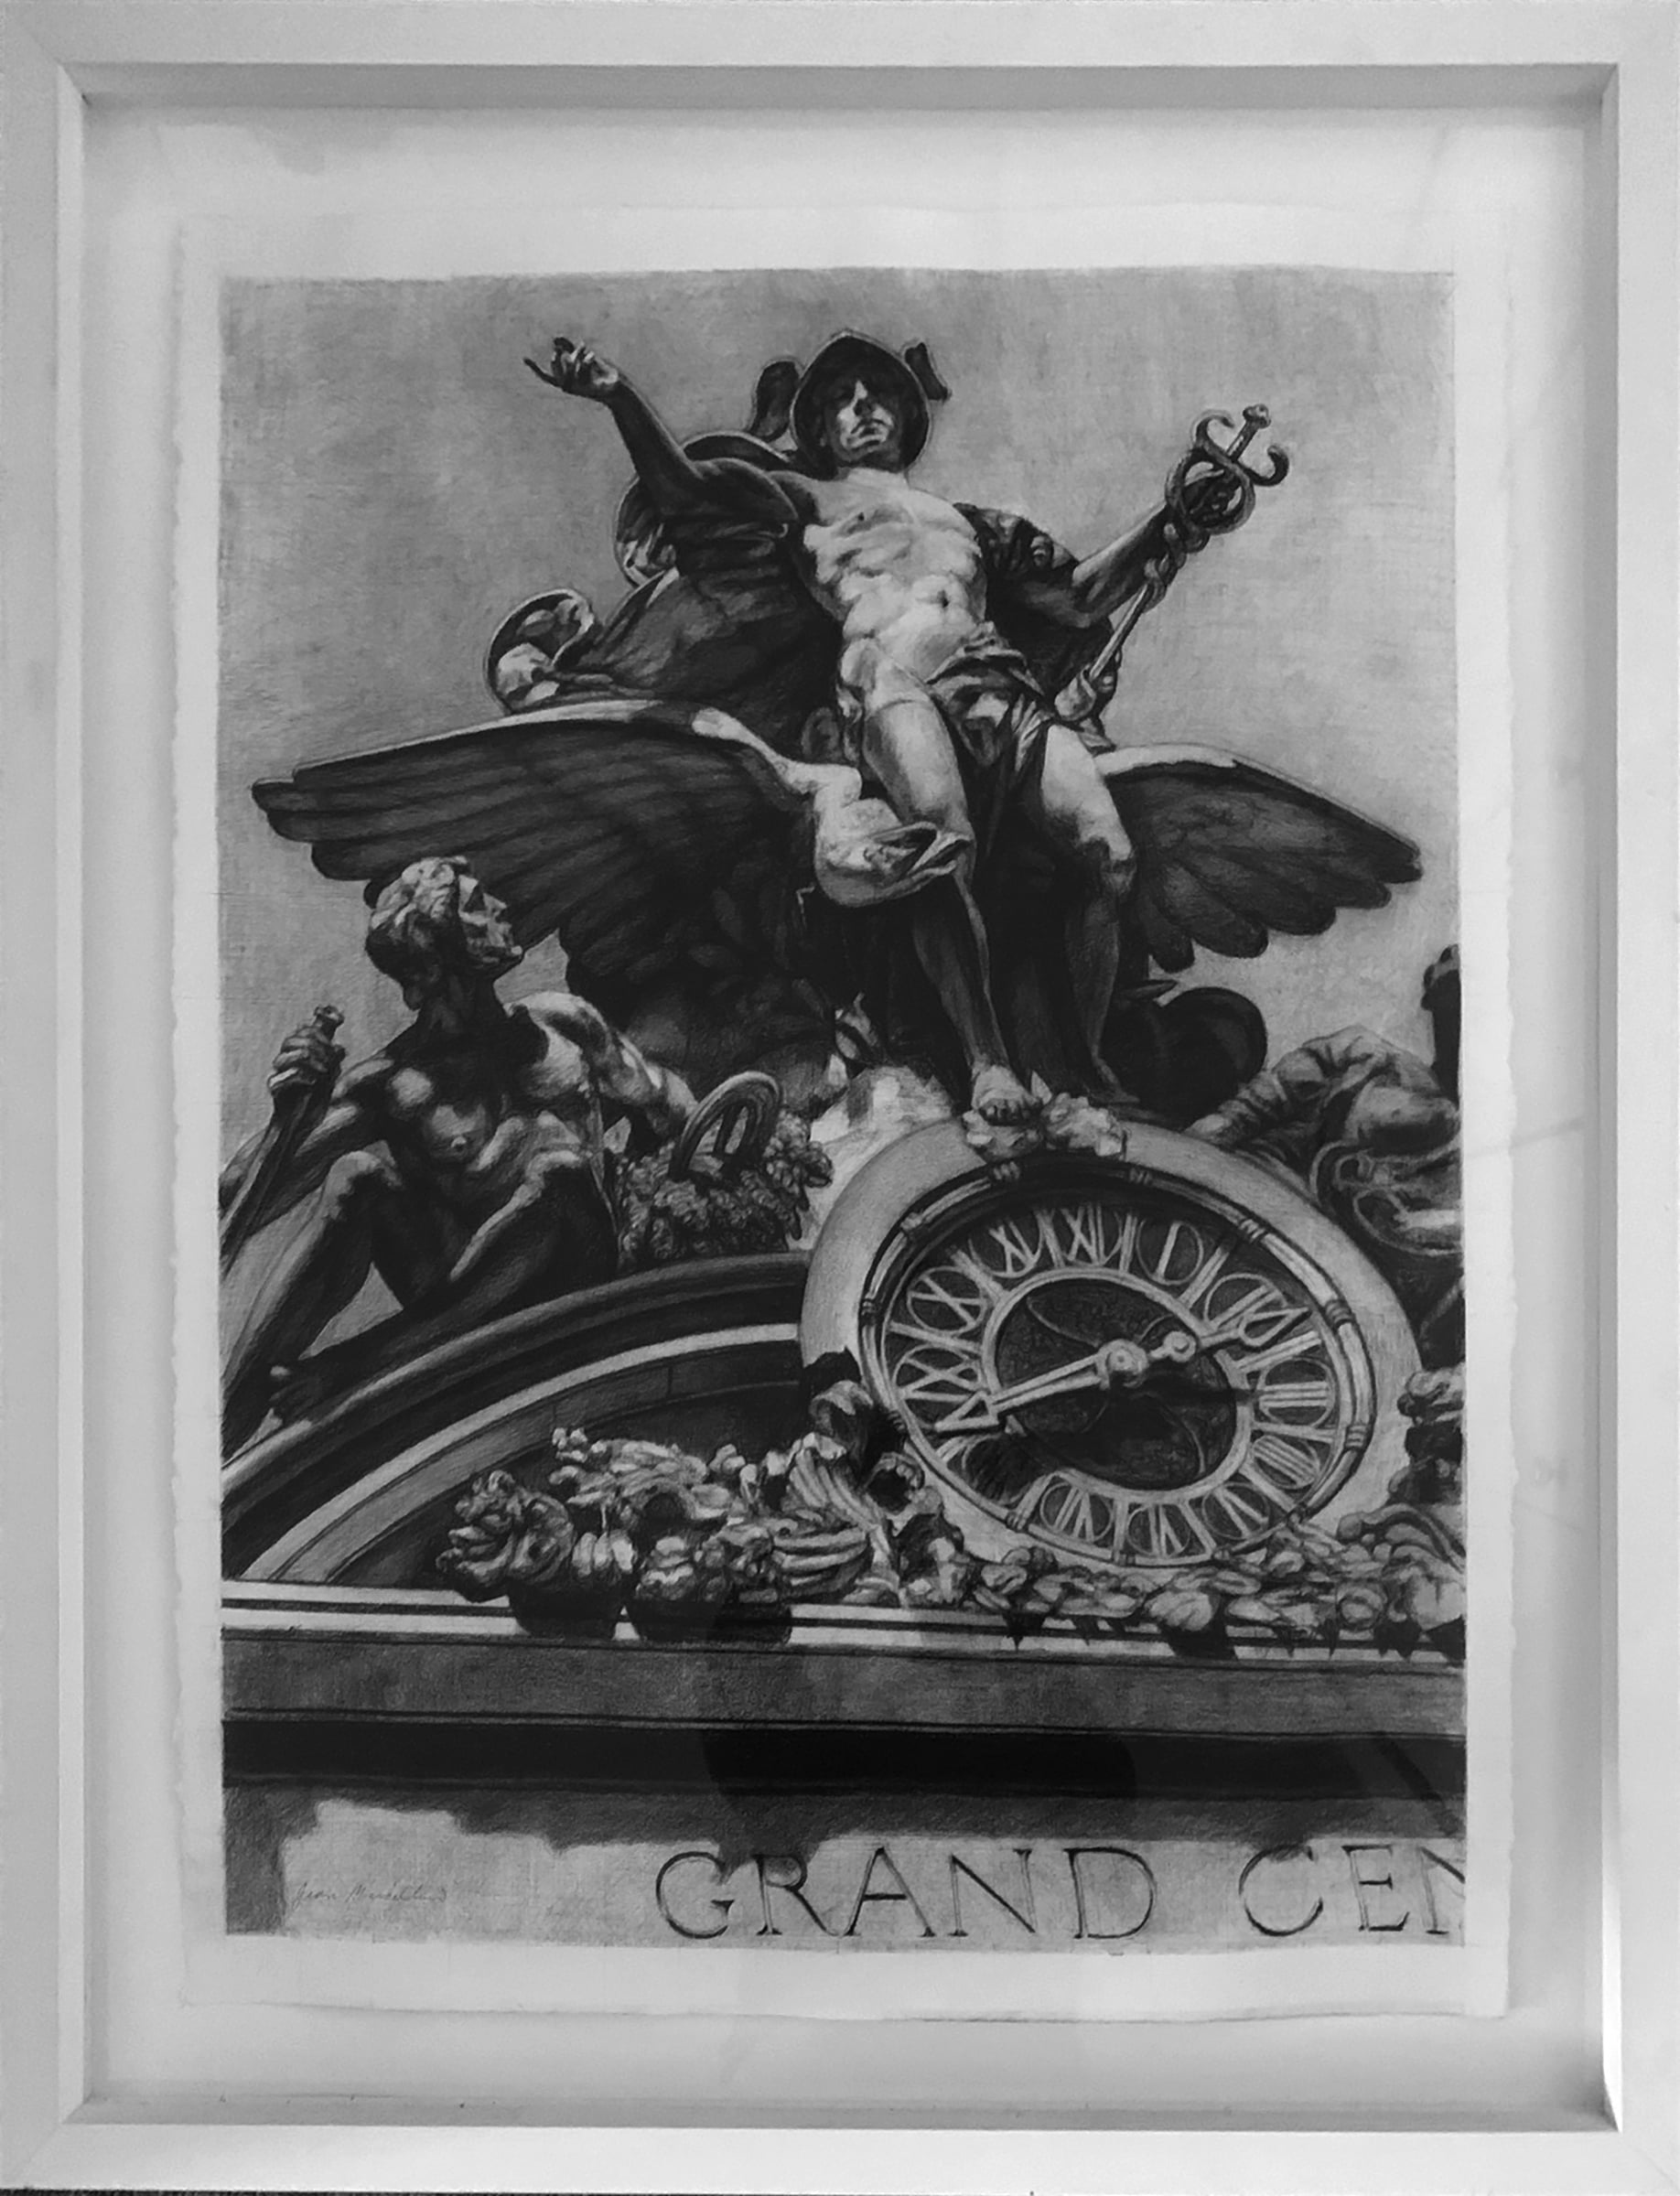 "Mercury atop Grand Central" by Jean Marcellino in a white matte with a white frame.